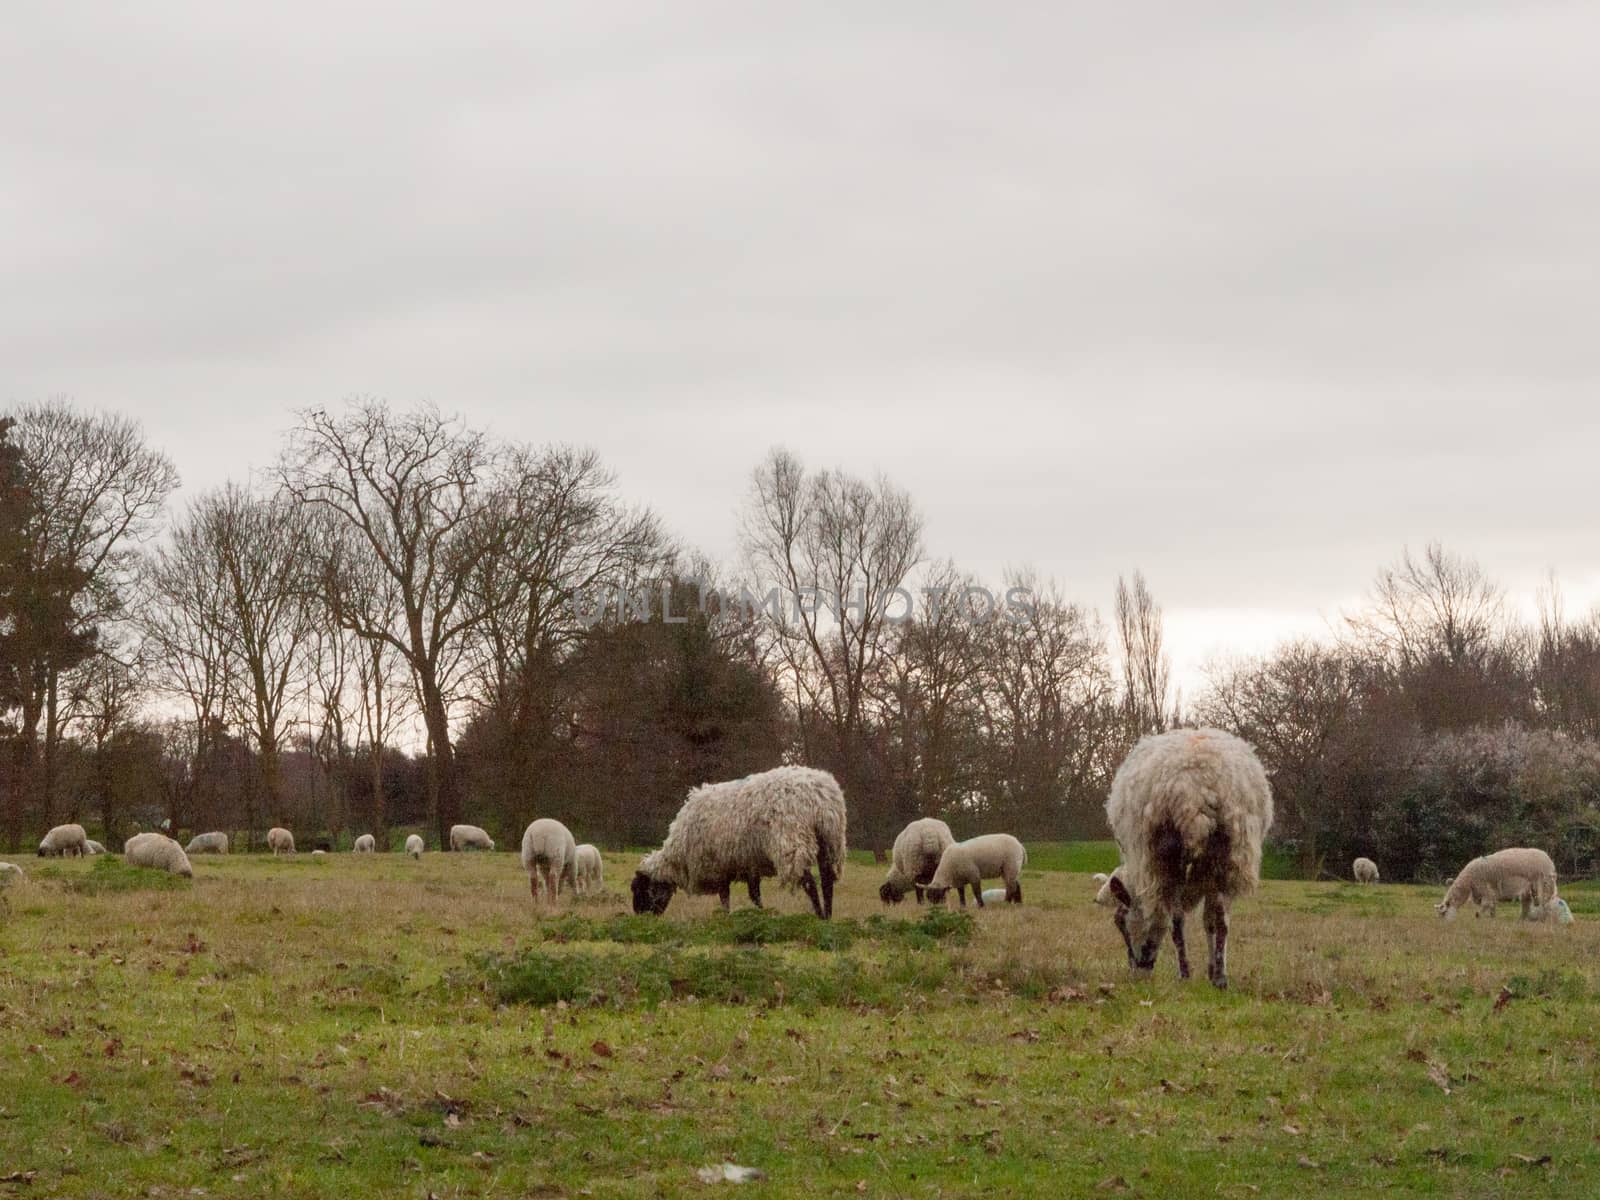 Farm sheep grazing and relaxing in spring